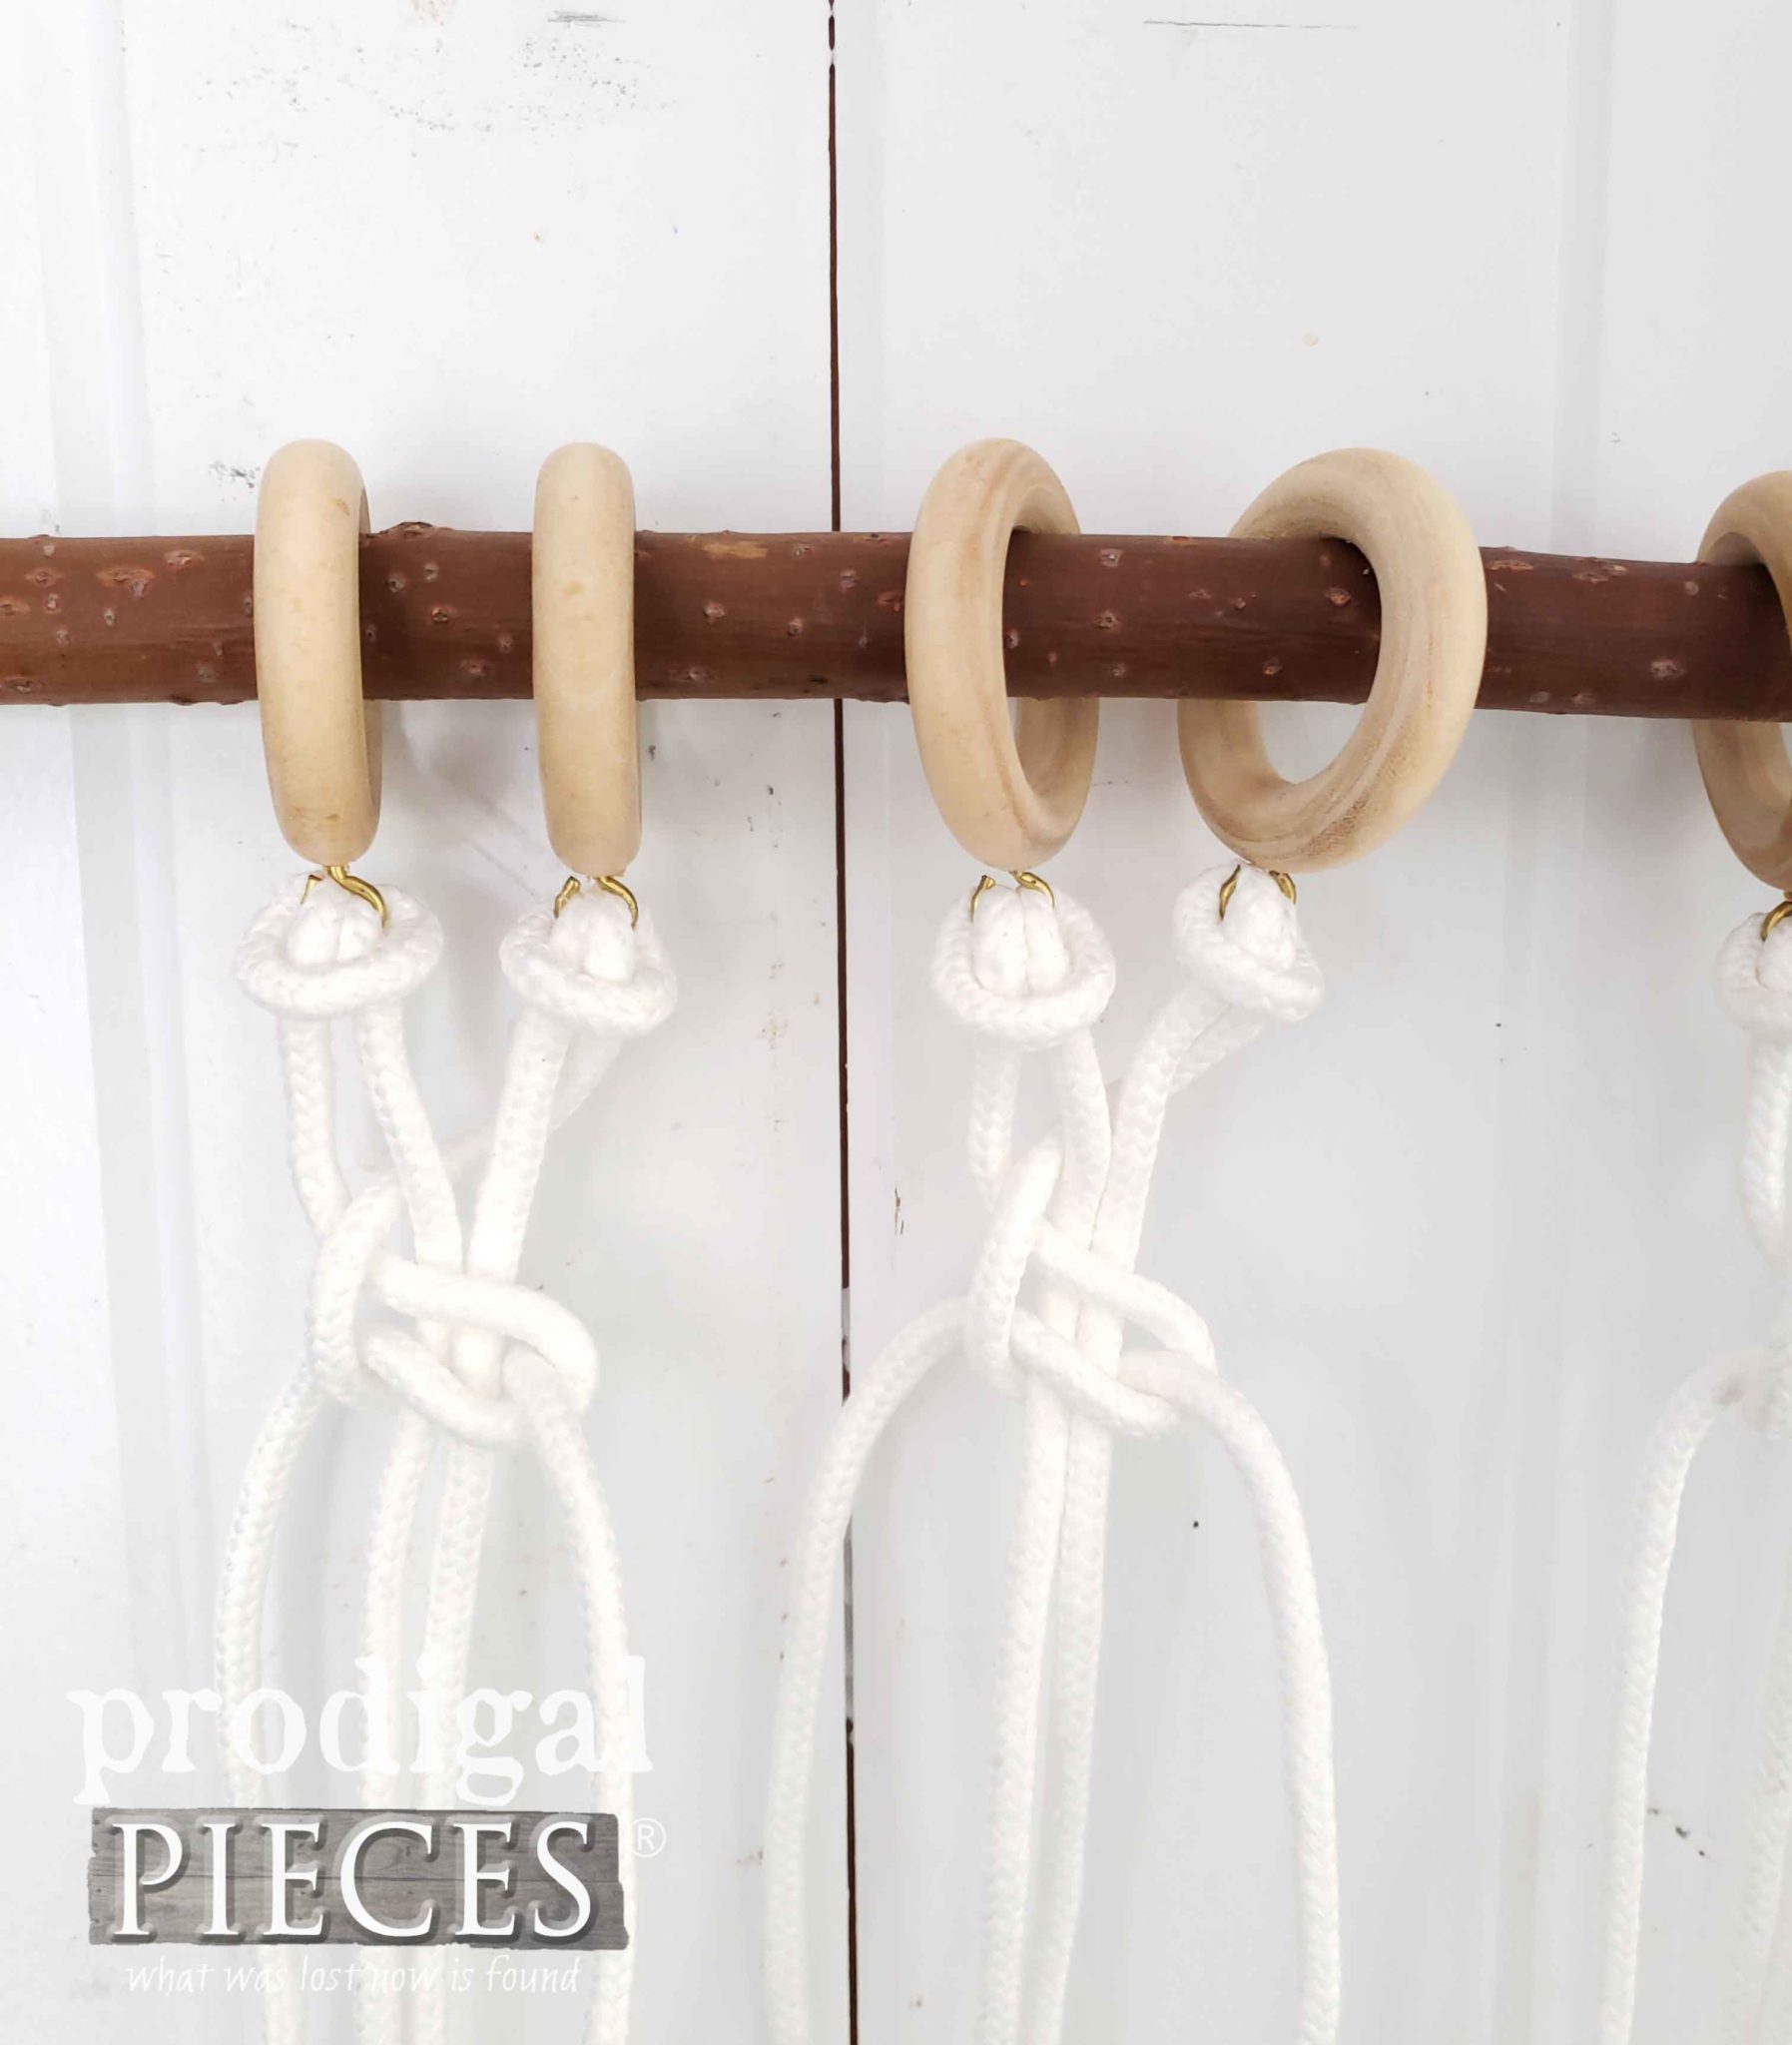 DIY Macrame Wall Art with First Course of Square Knots by Larissa of Prodigal Pieces | prodigalpieces.com